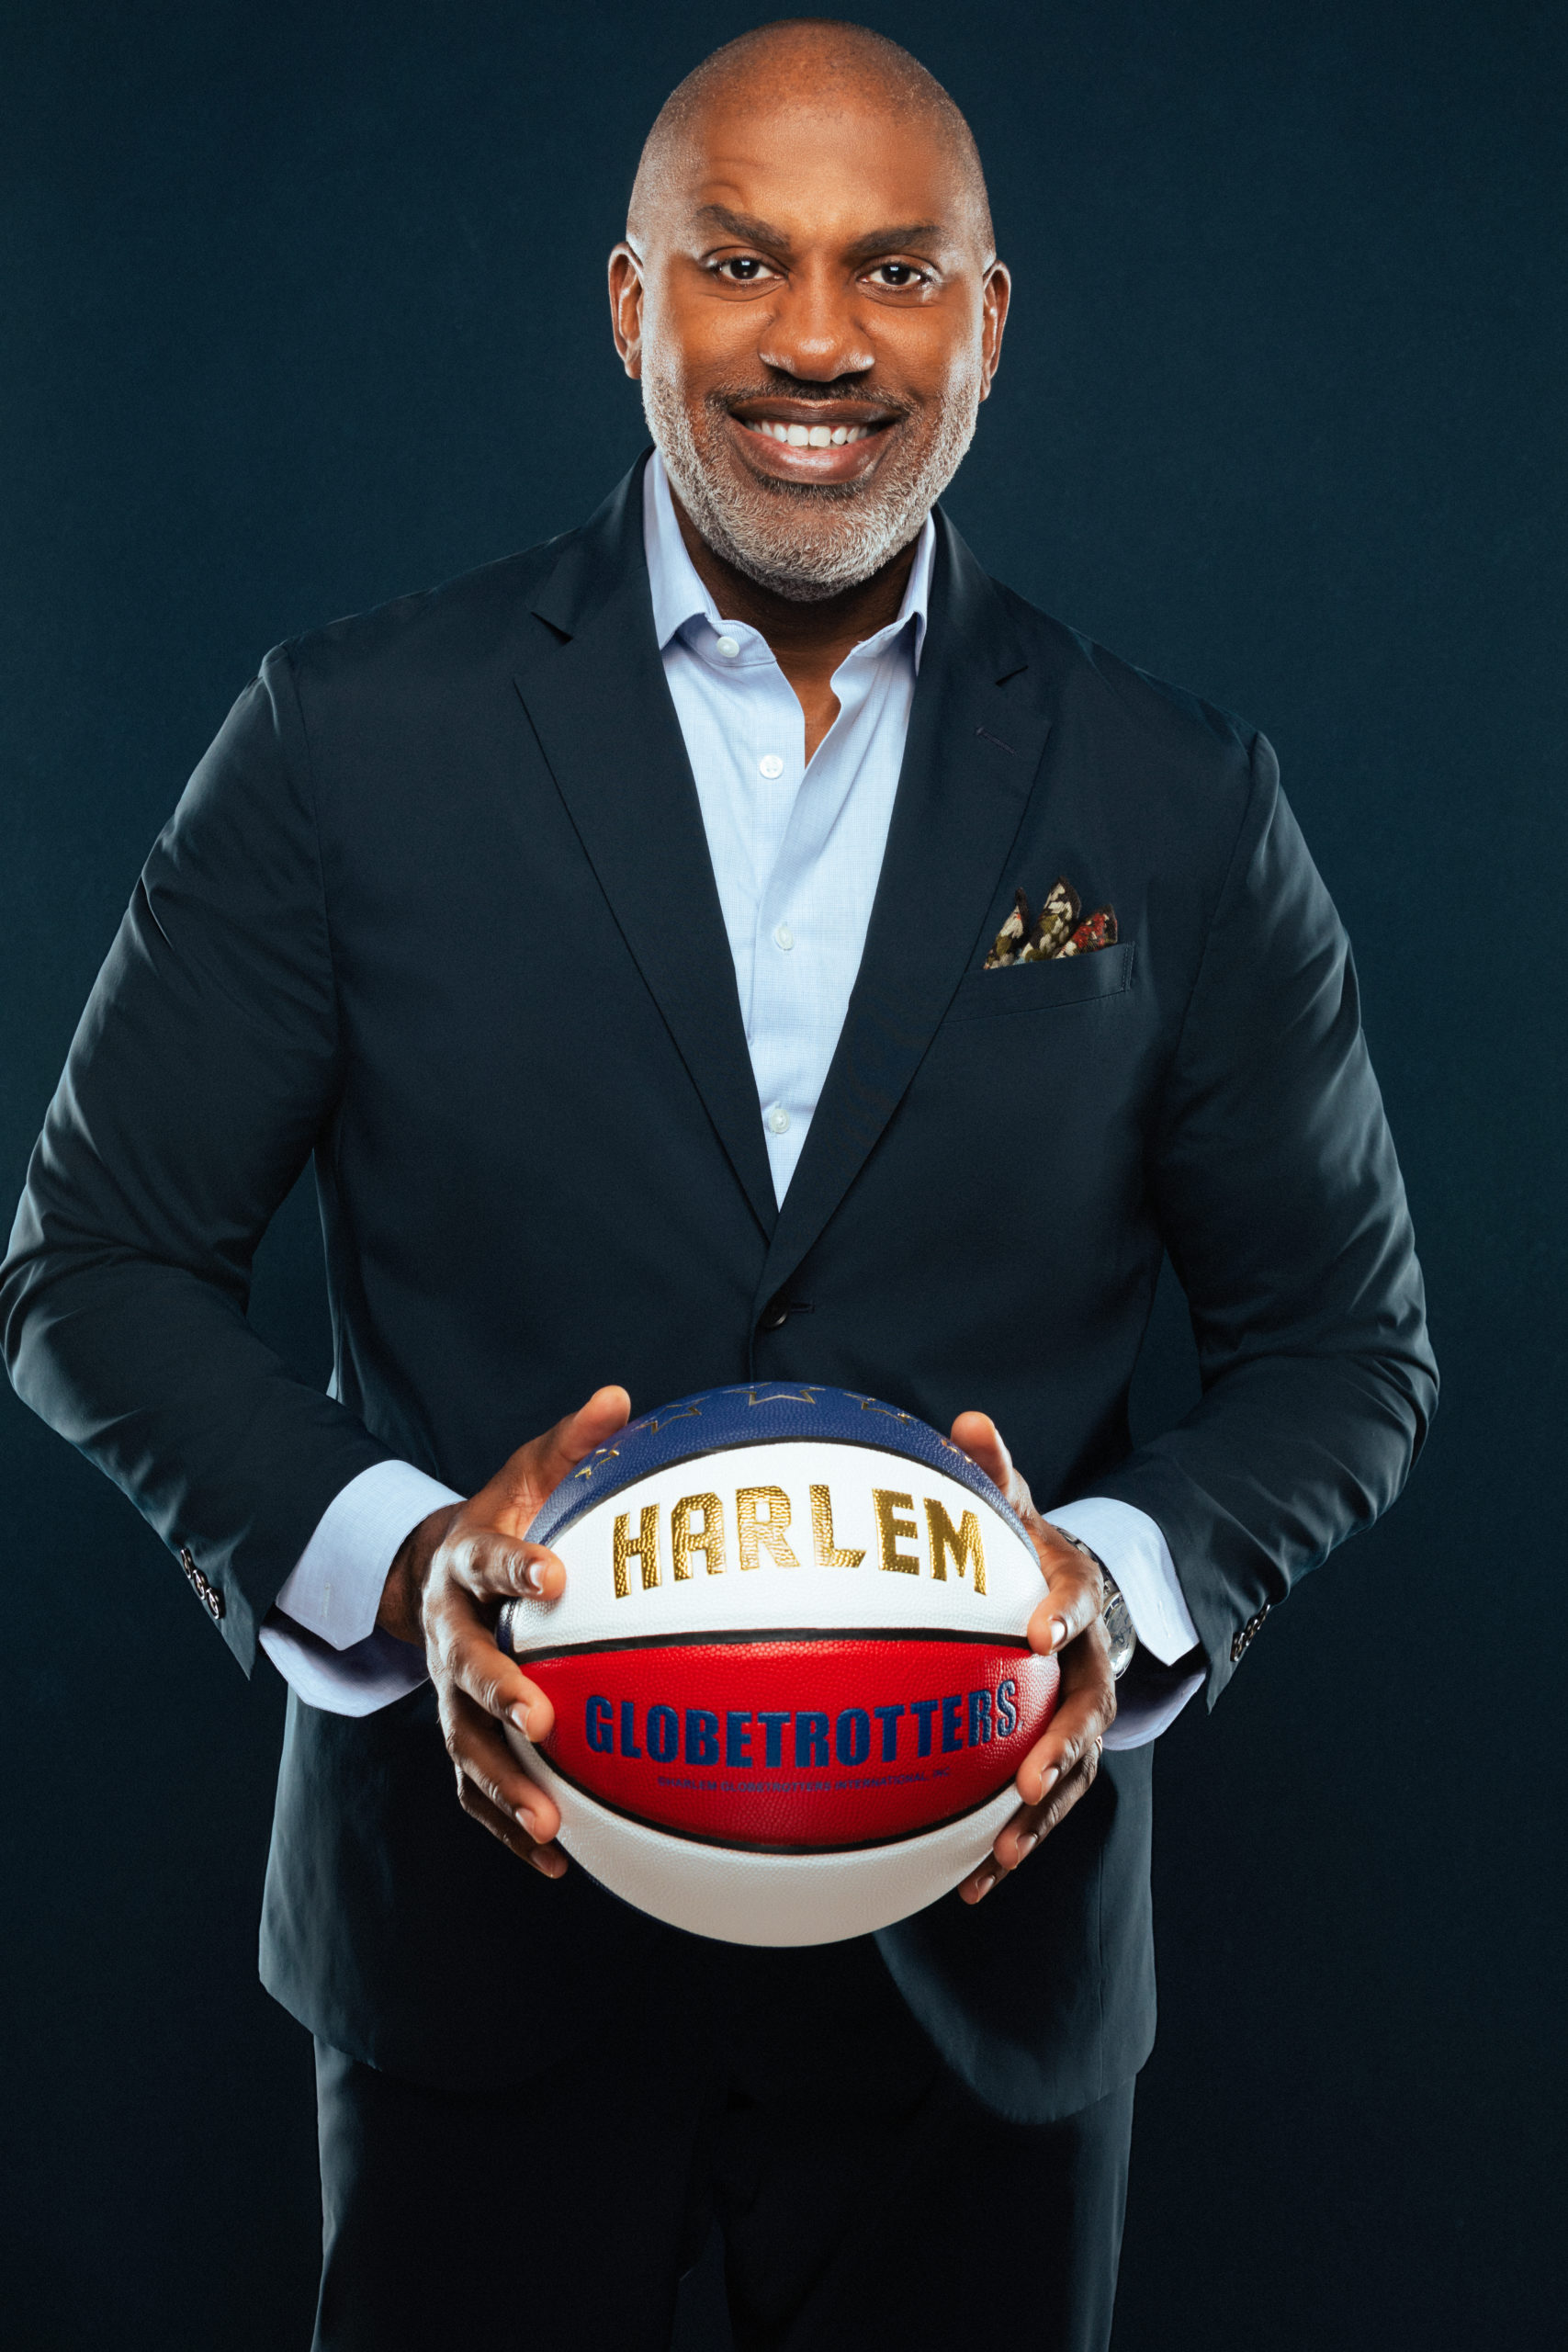 Keith Dawkins, new president of the Harlem Globetrotters